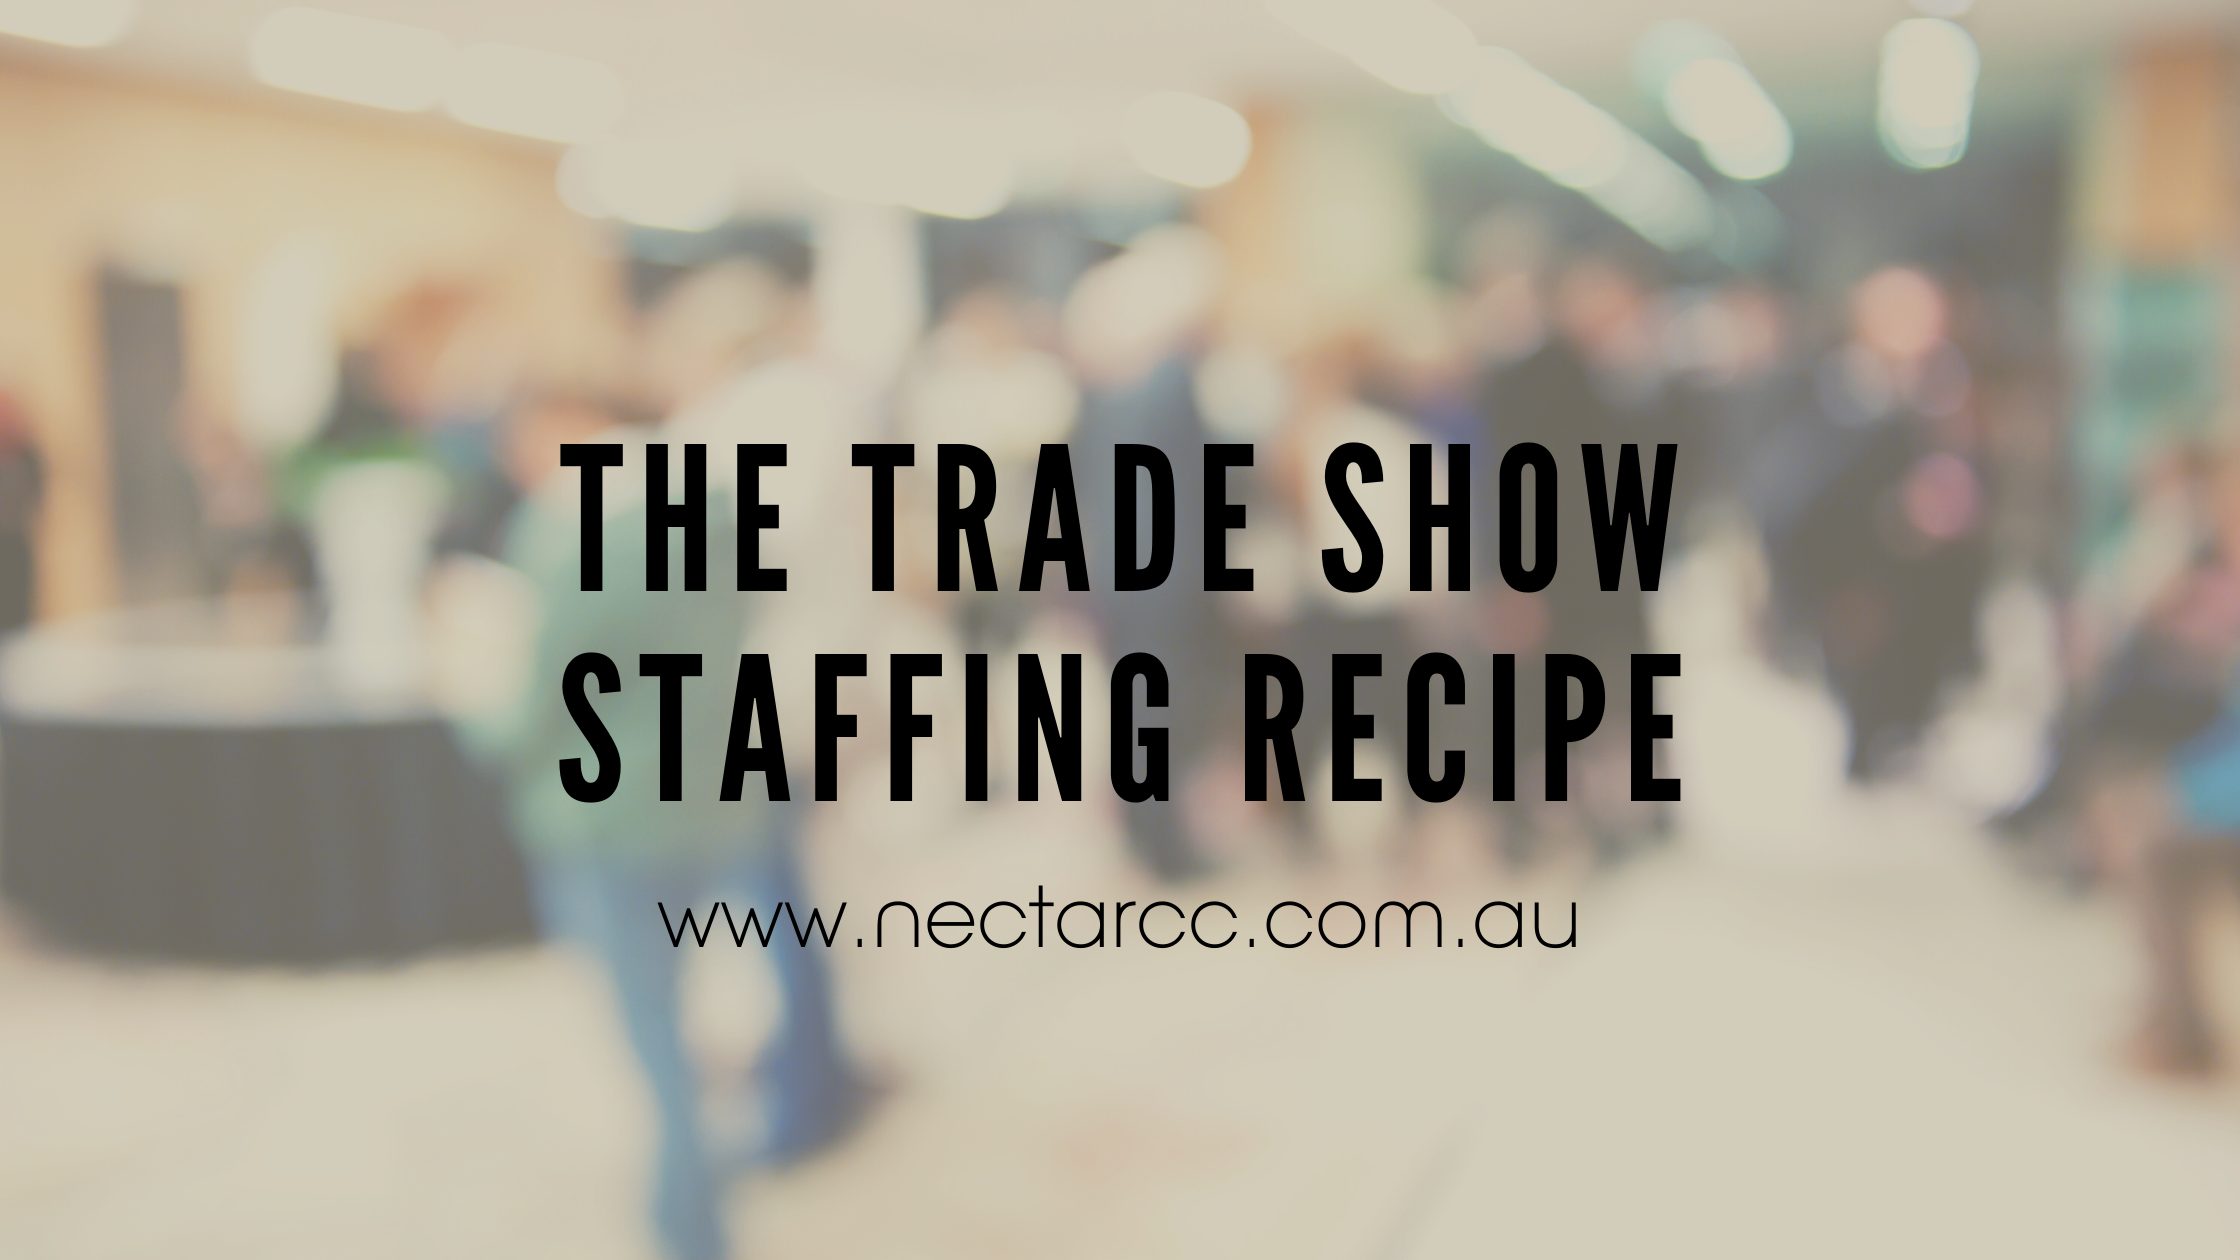 The Trade Show Staffing Recipe